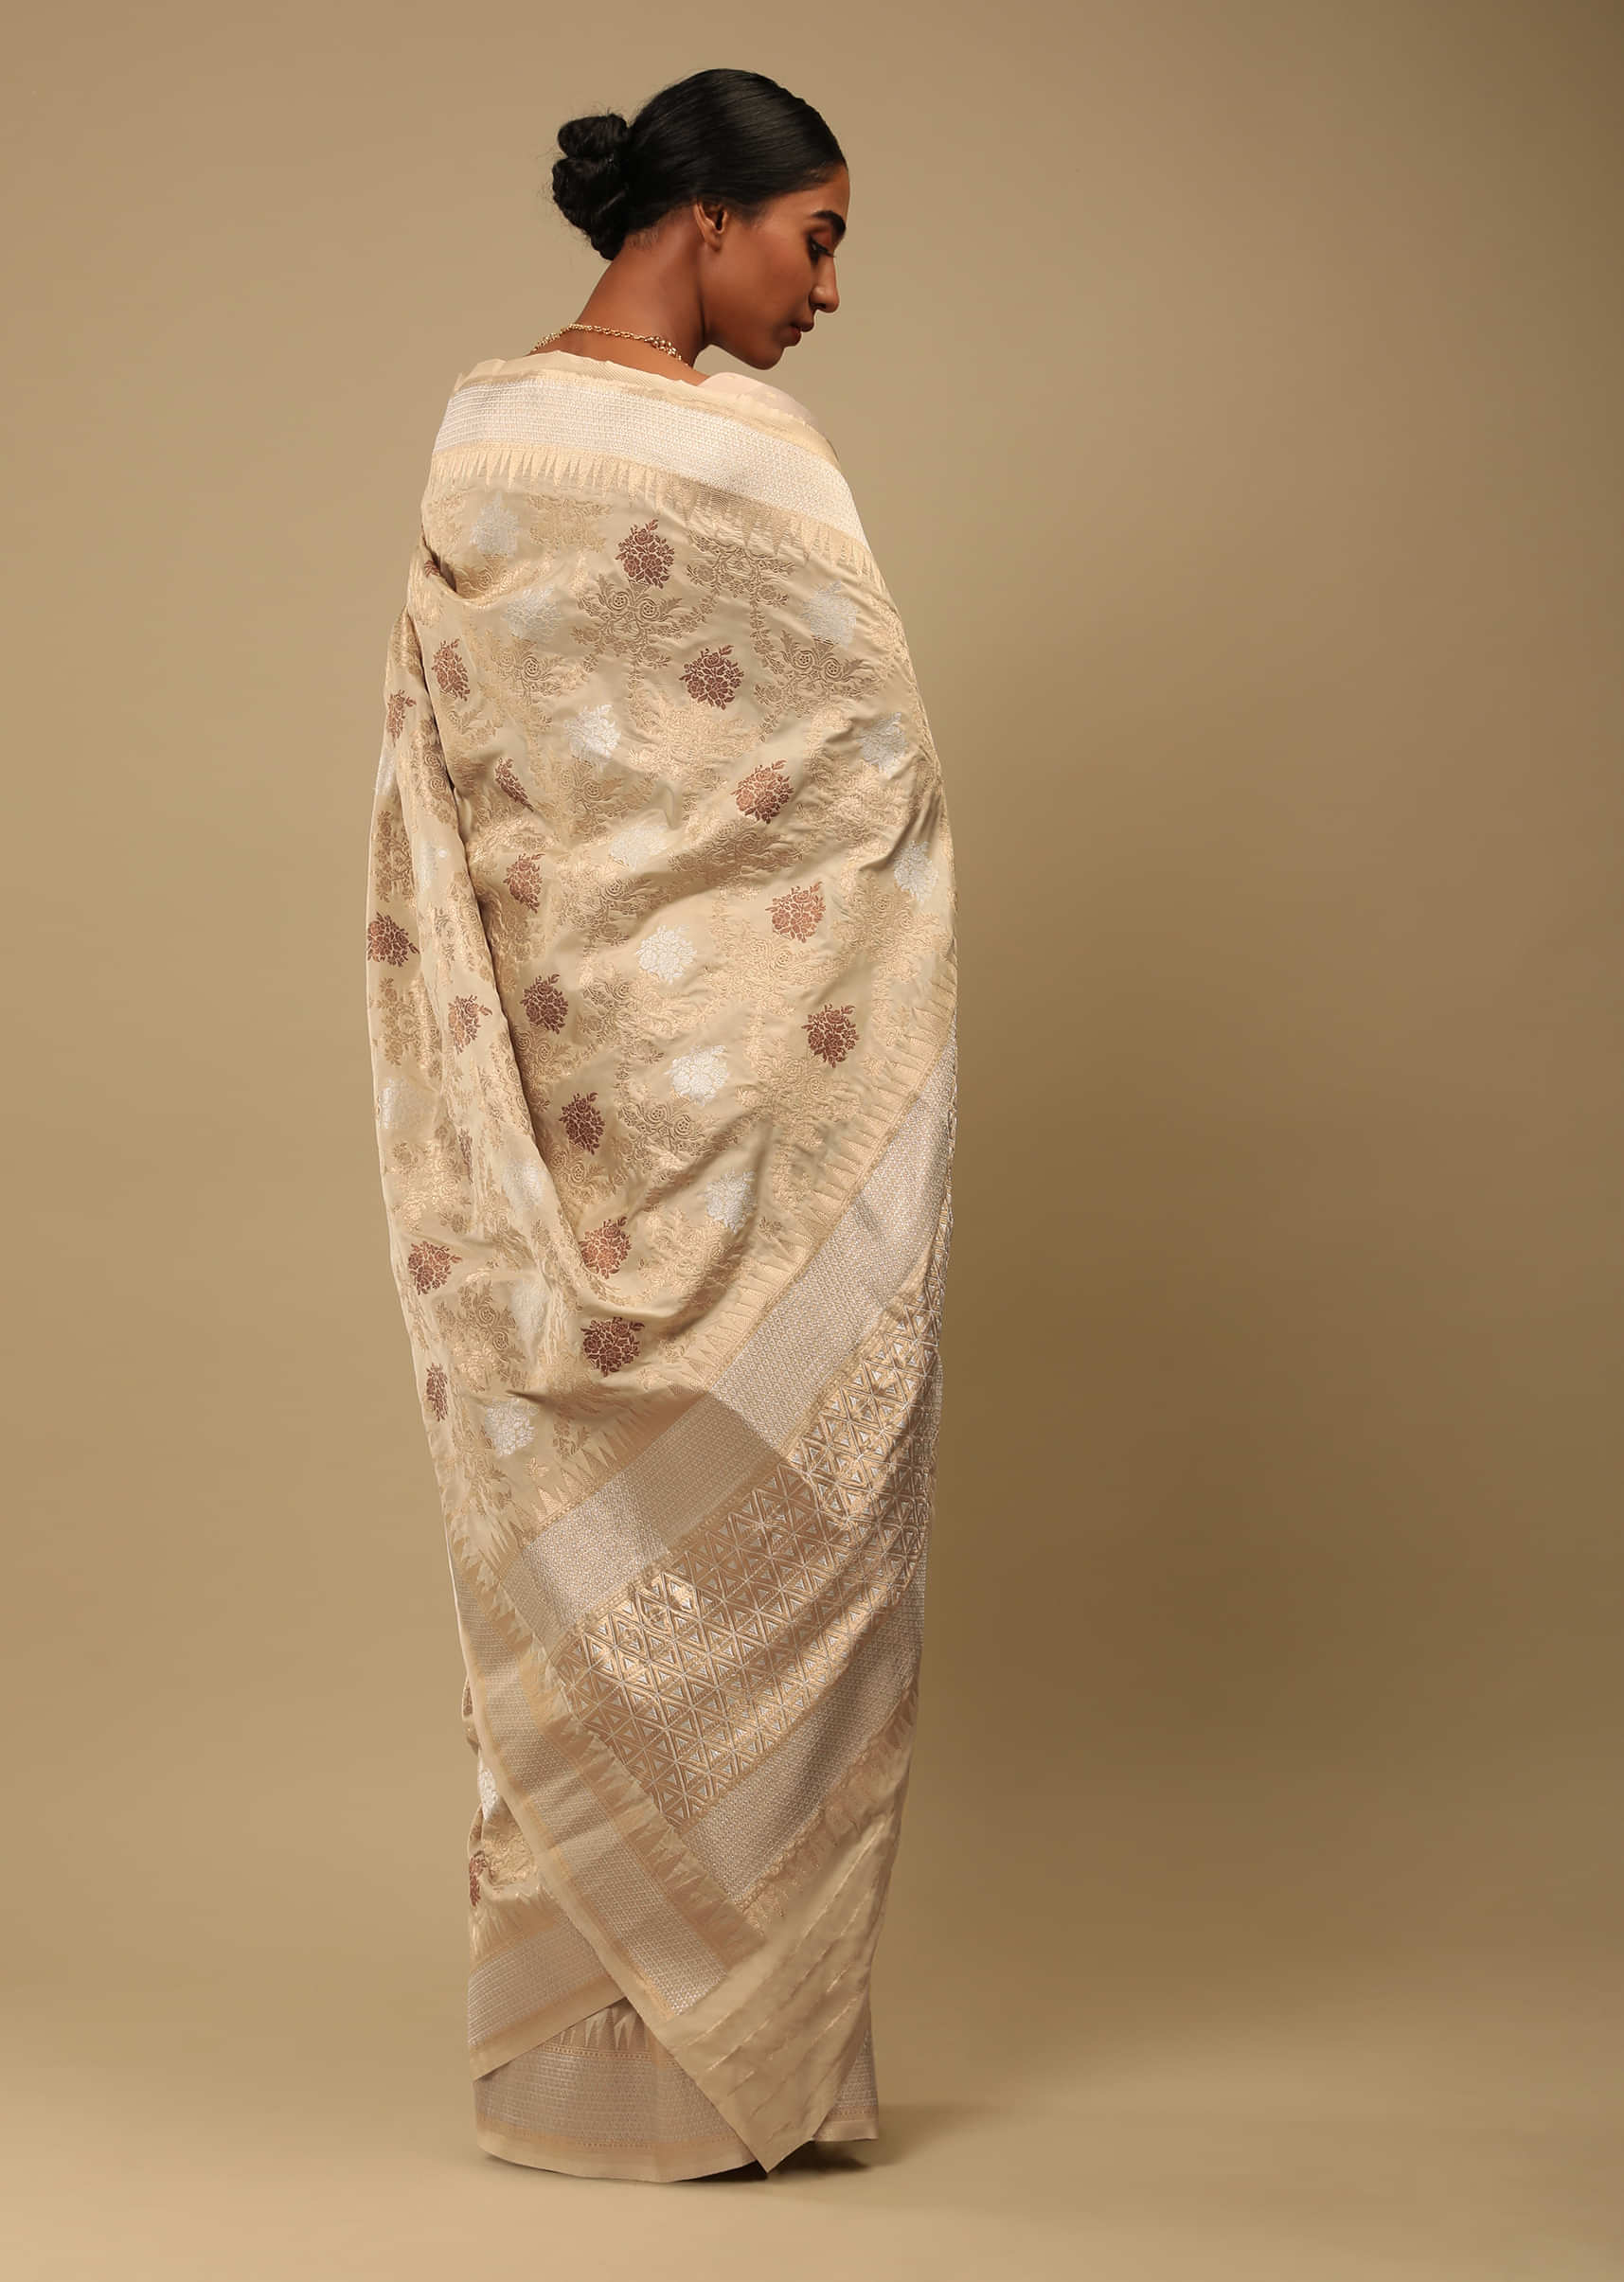 Gold Beige Saree In Art Handloom Silk With Three Toned Woven Floral Jaal, Geometric Motifs On The Pallu And Unstitched Blouse  